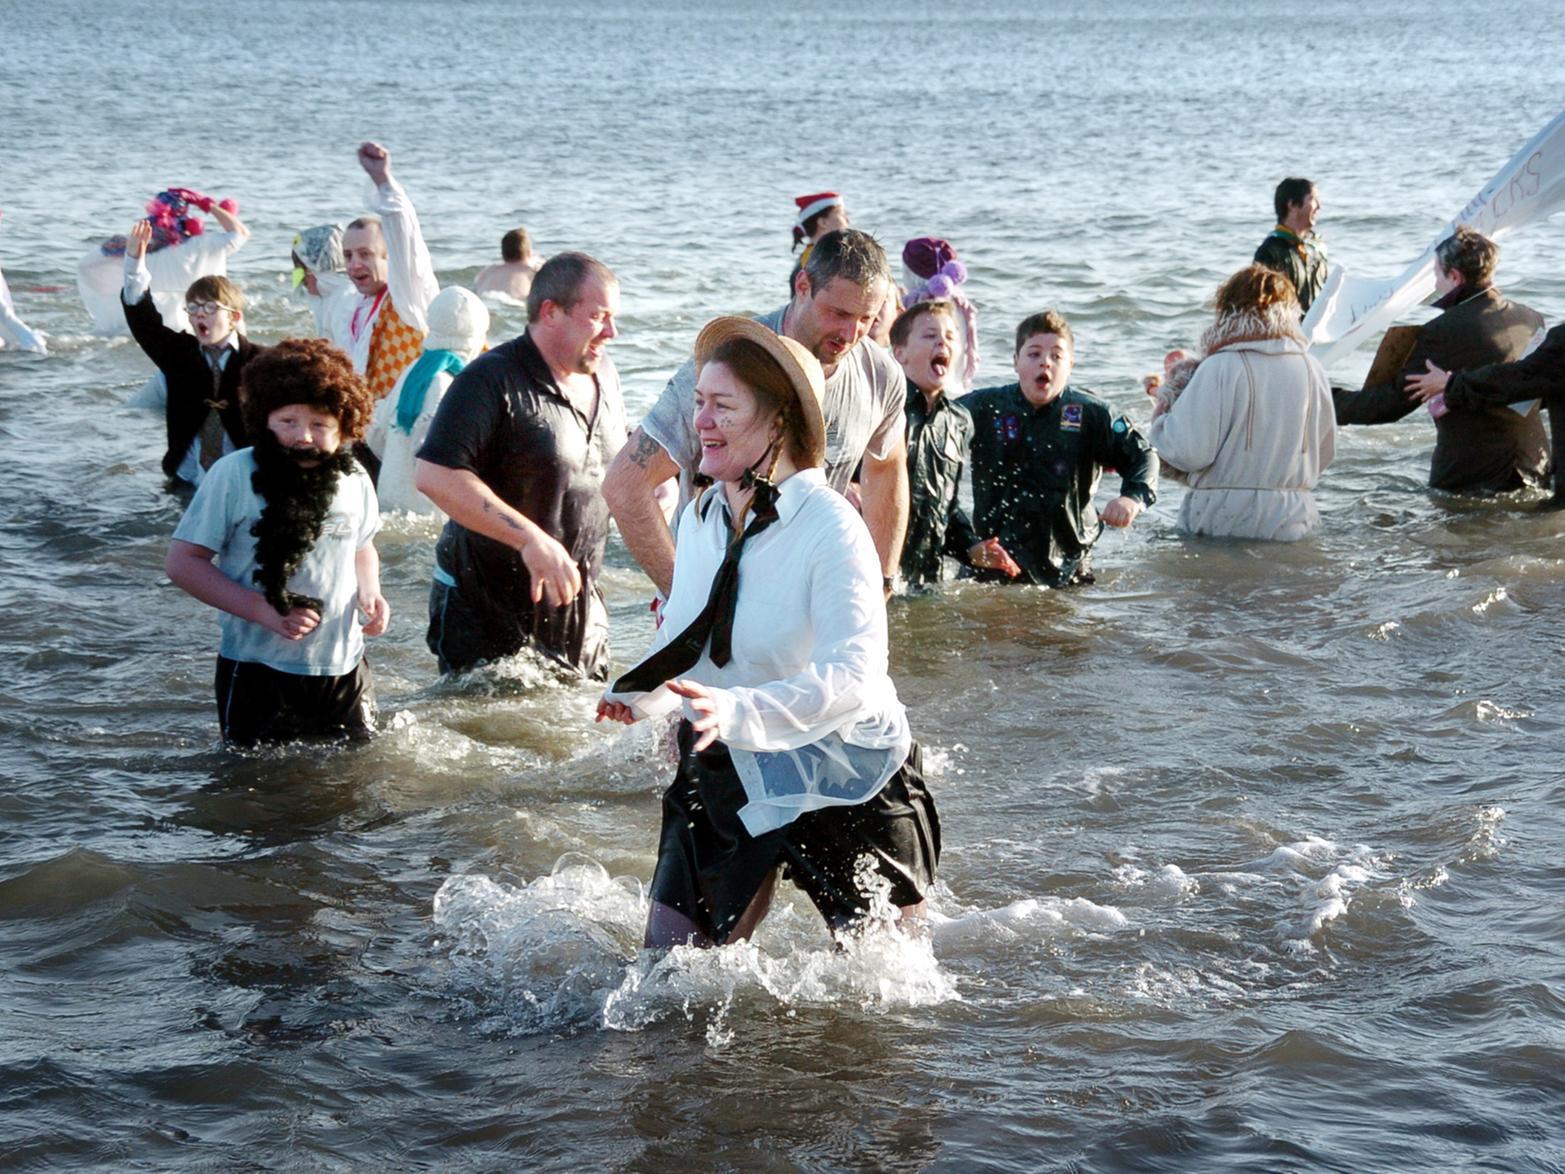 Braving the freezing North Sea waters.